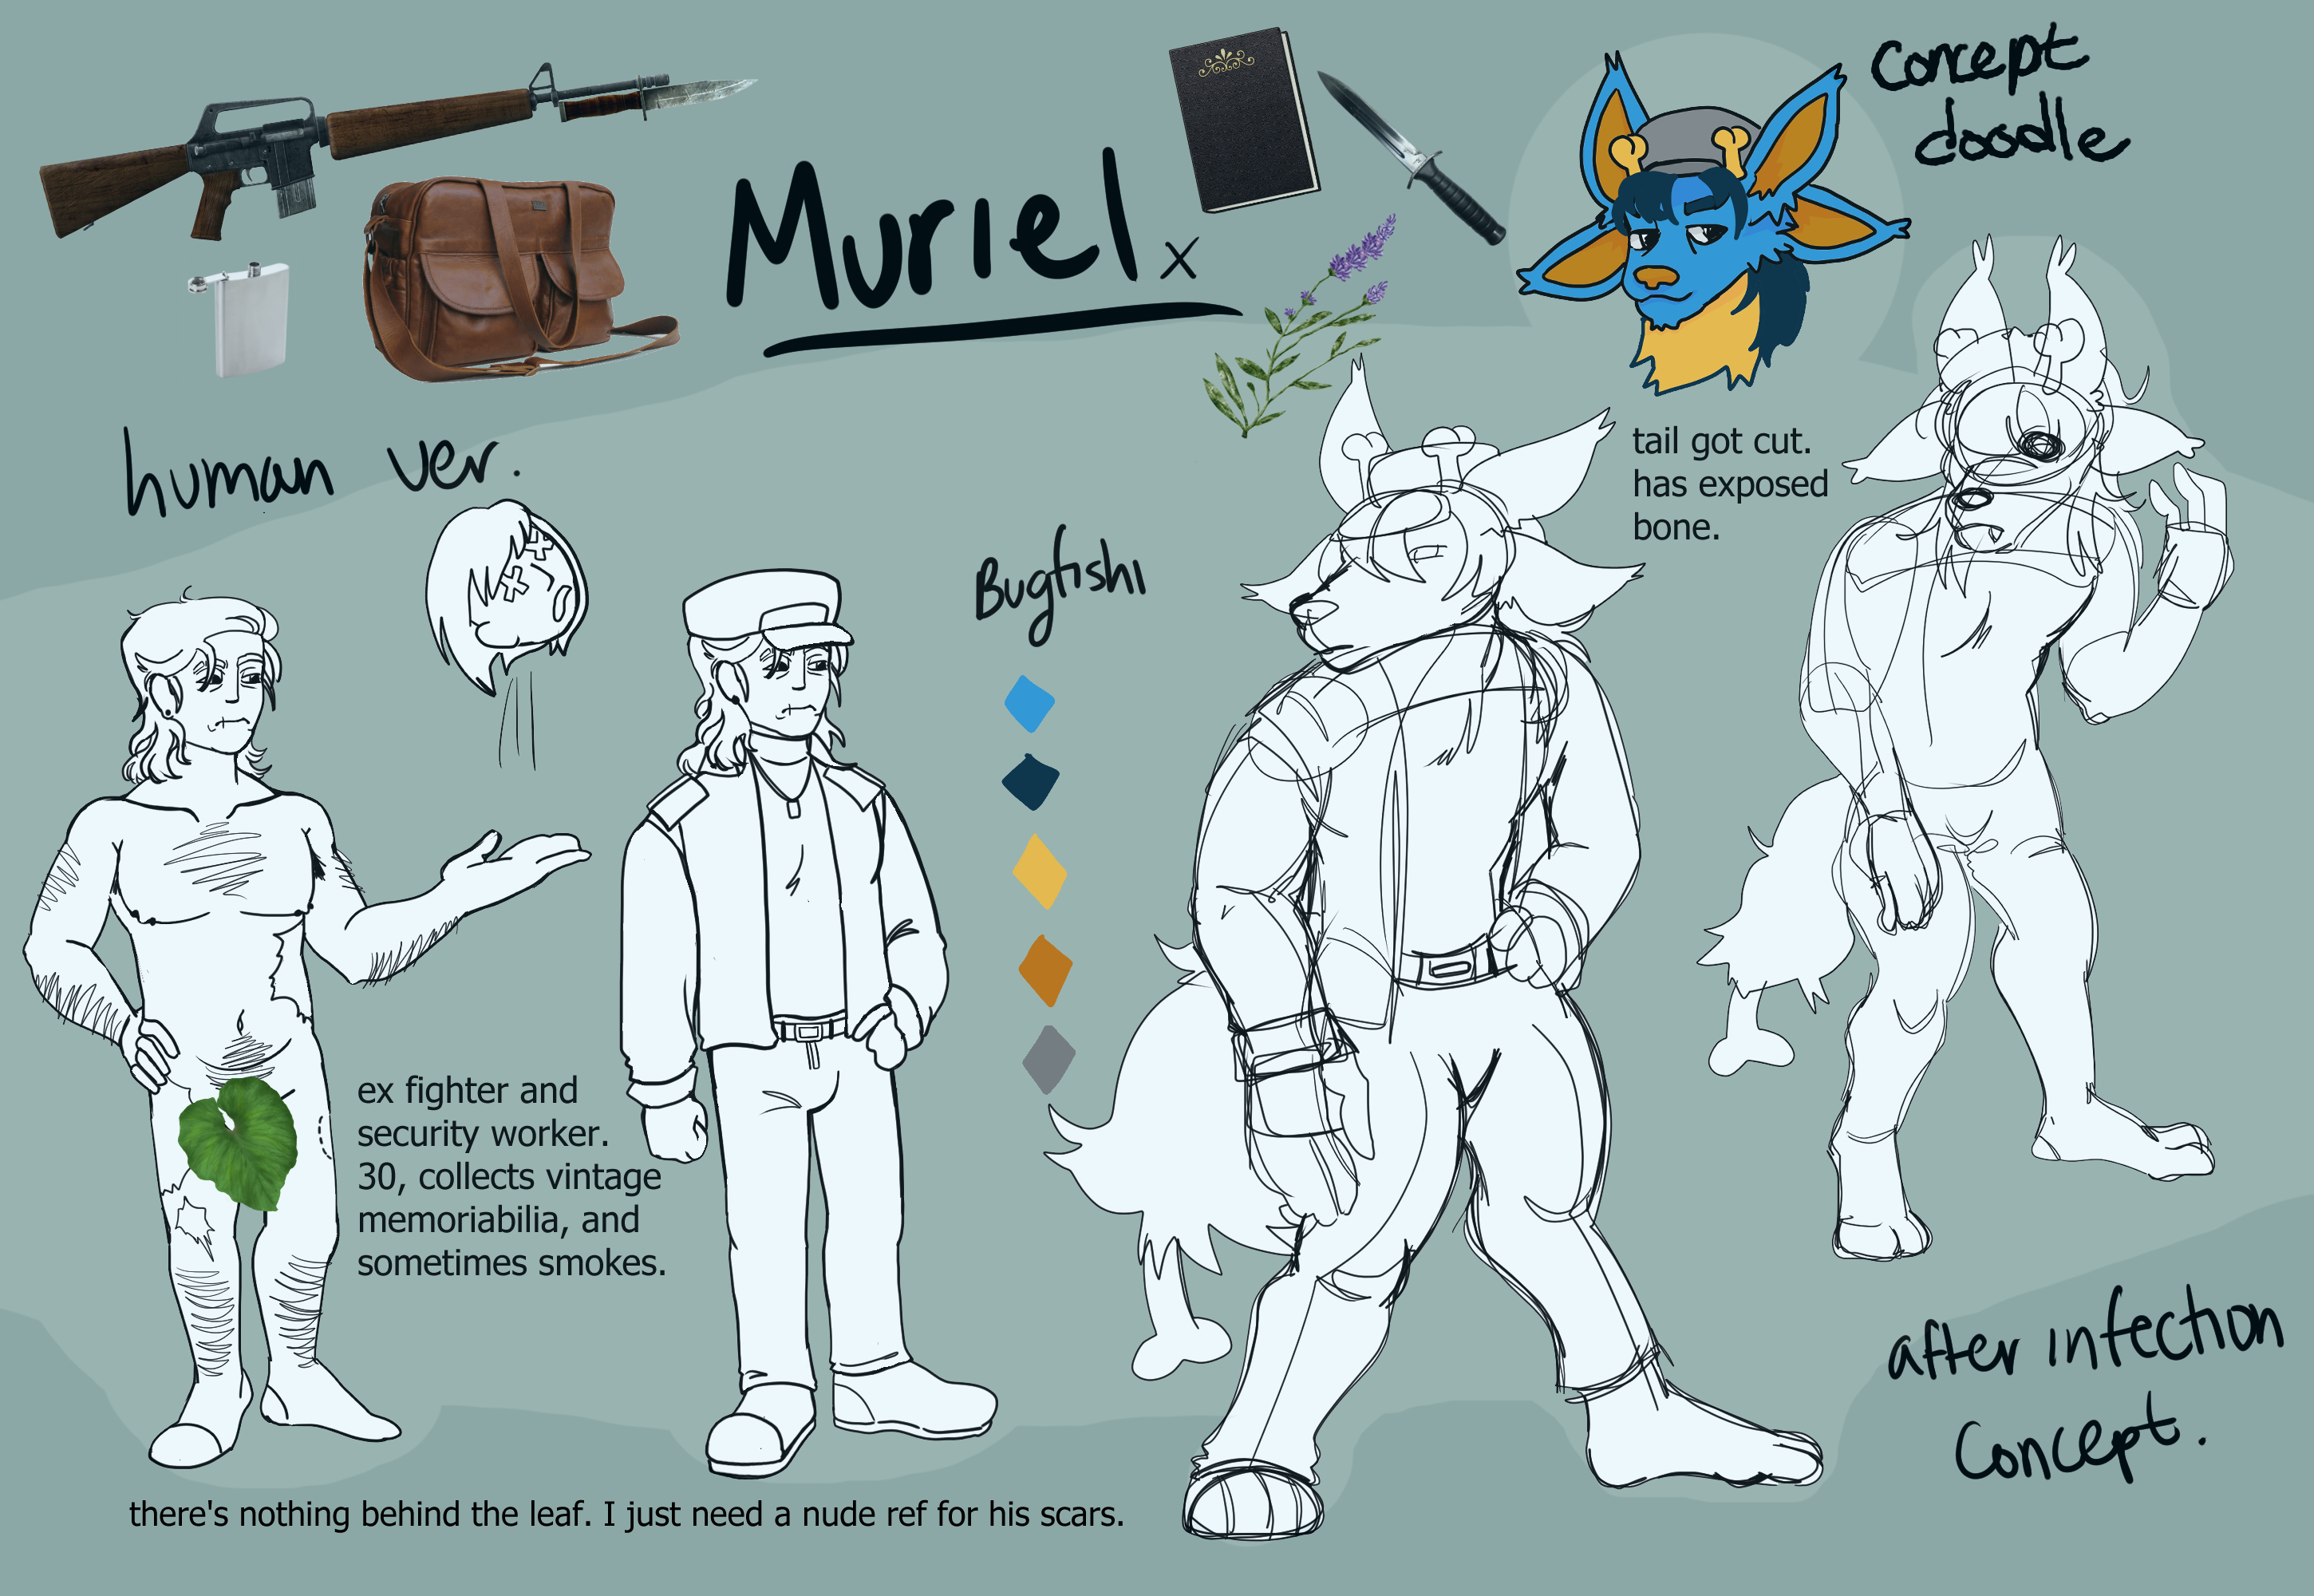 more muriel art while I write his story